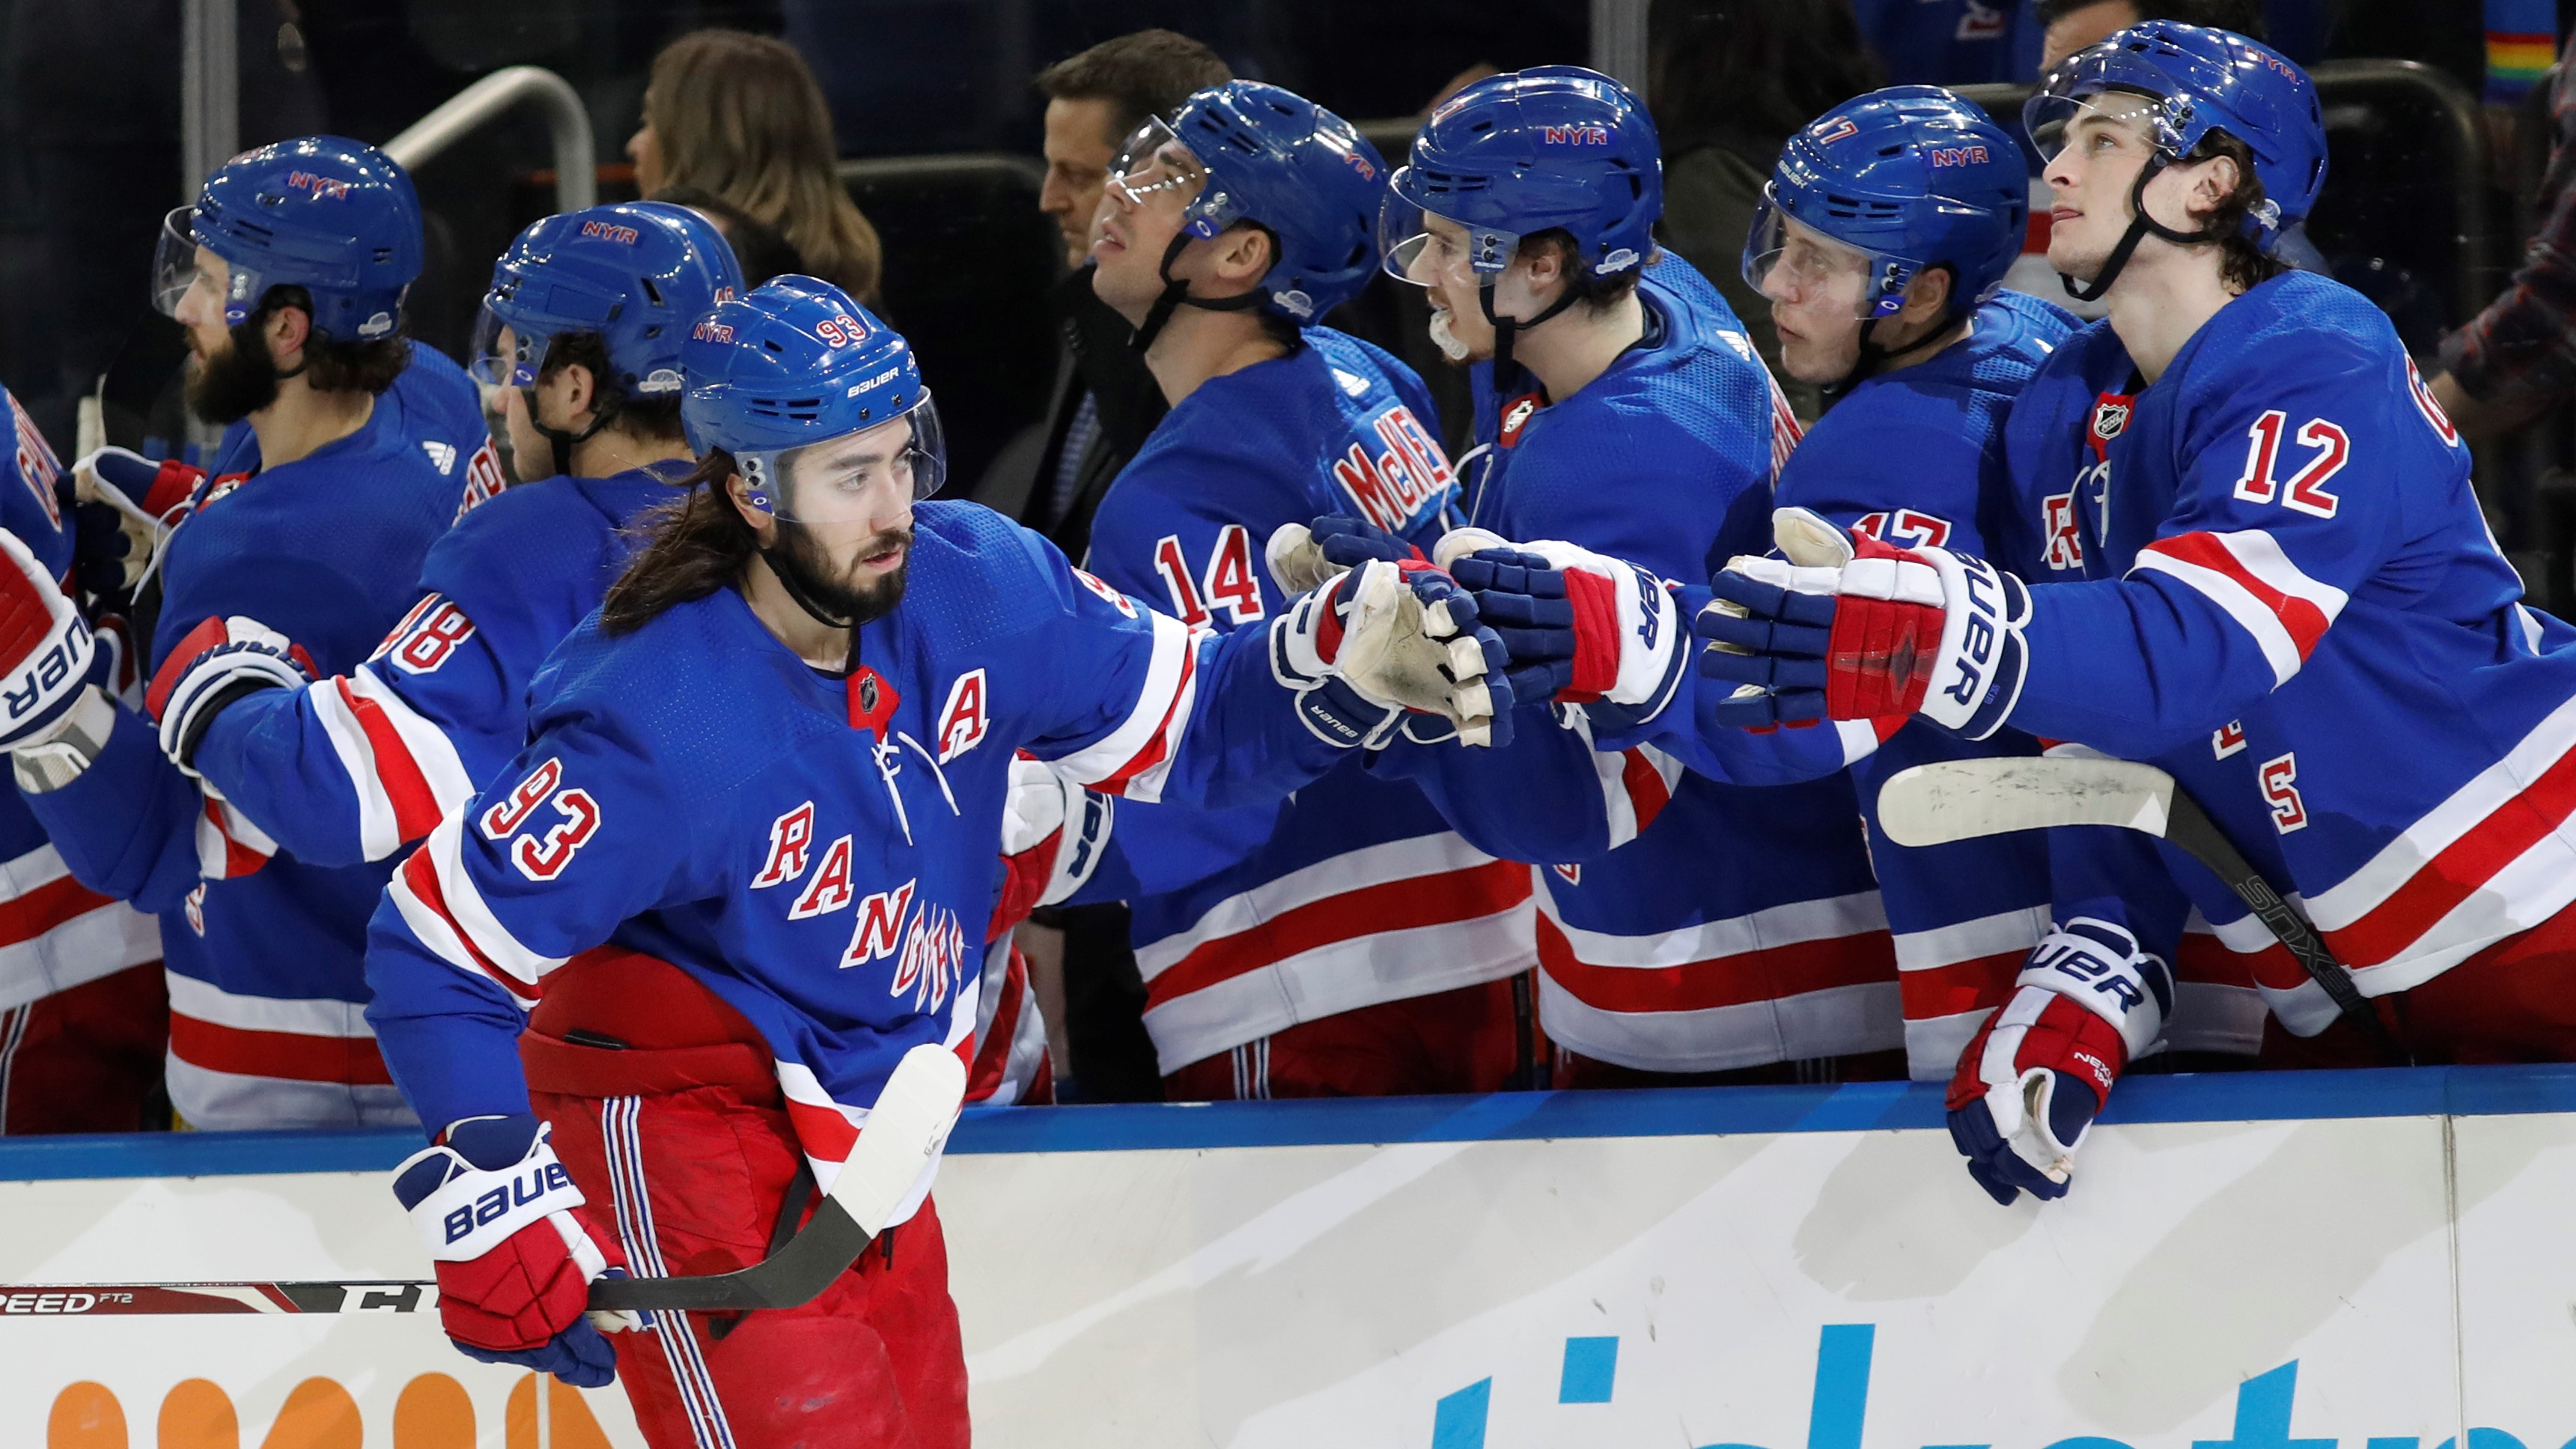 Sabres stunned by last-second goal as Rangers win 5-4